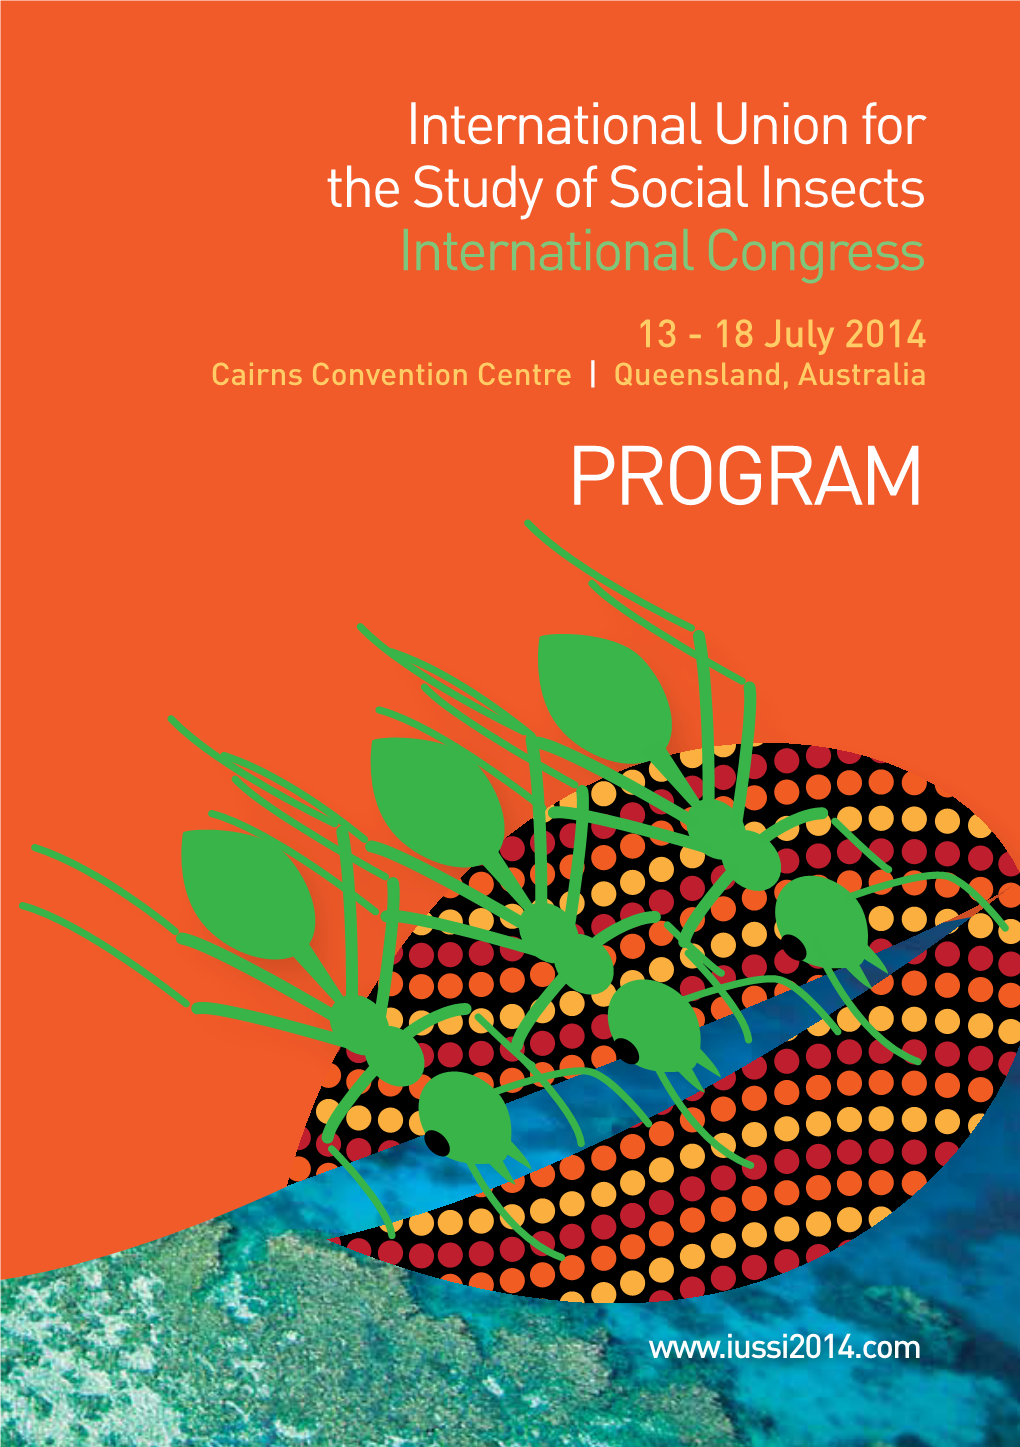 International Union for the Study of Social Insects International Congress 13 - 18 July 2014 Cairns Convention Centre | Queensland, Australia PROGRAM